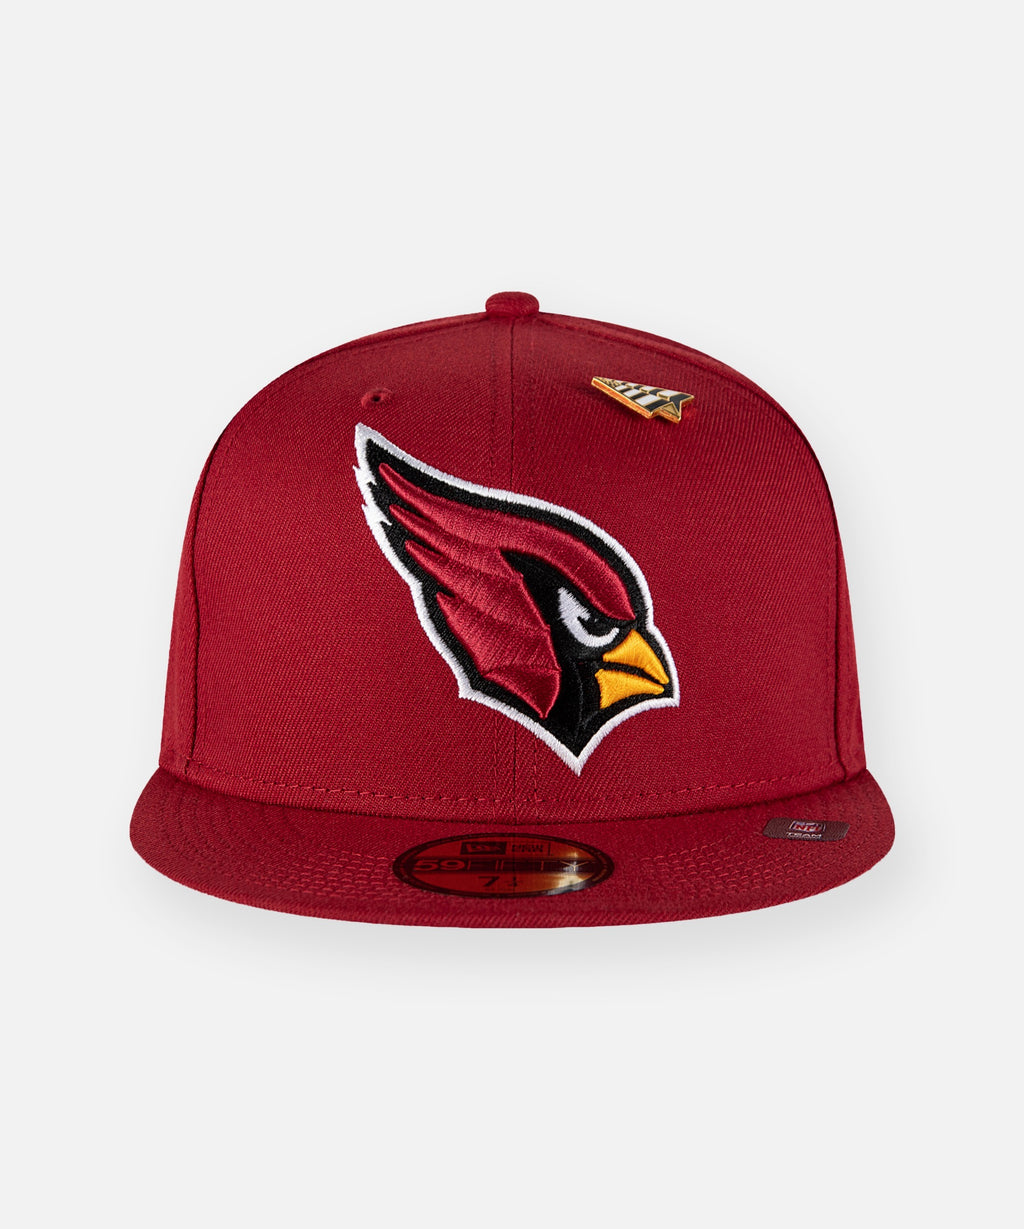 Paper Planes x Arizona Cardinals Team Color 59Fifty Fitted Hat